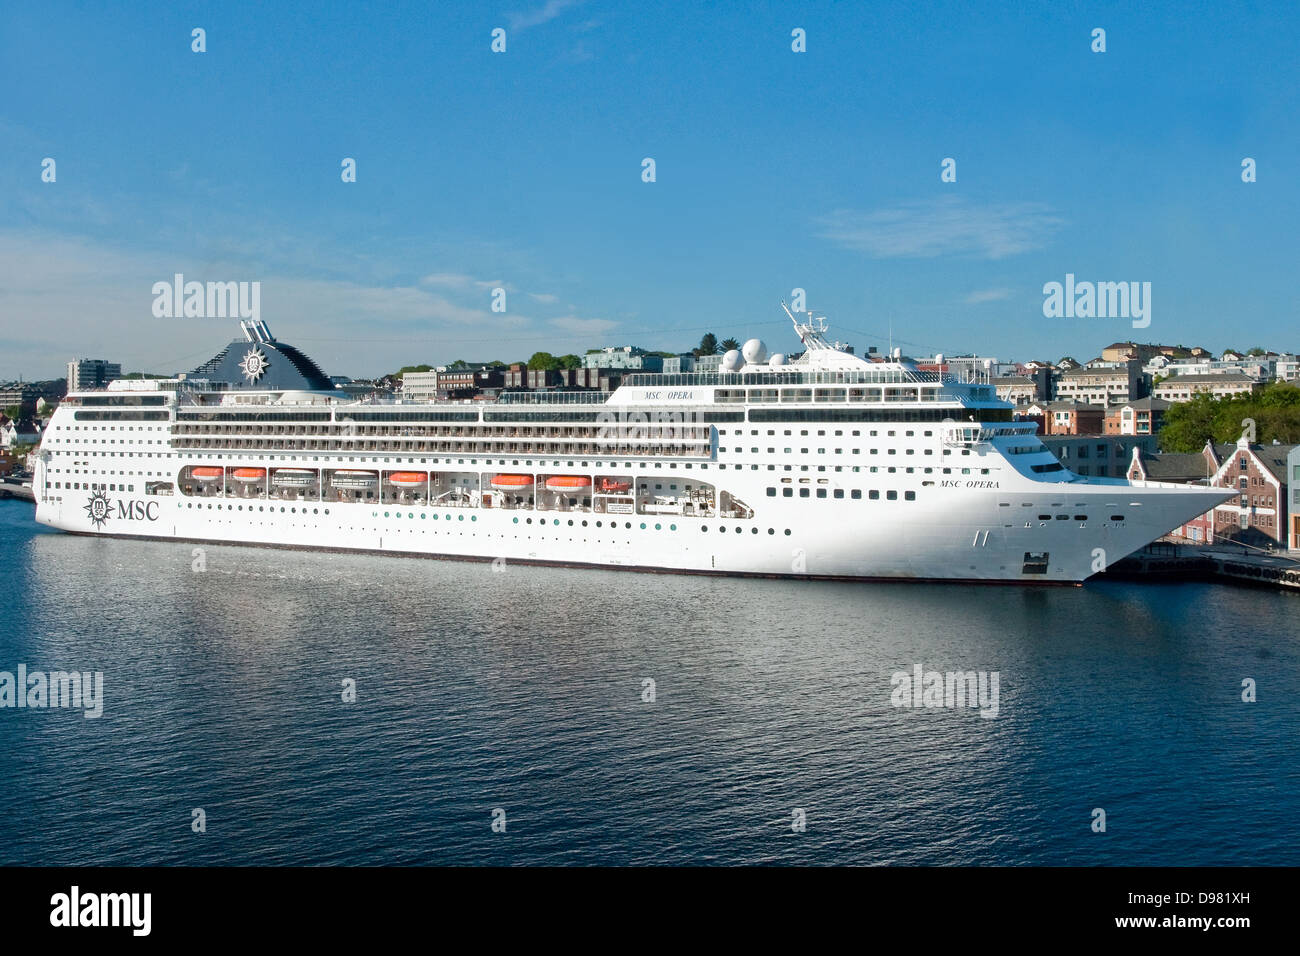 Cruise ship MSC Opera berthed in Stavanger, Norway Stock Photo